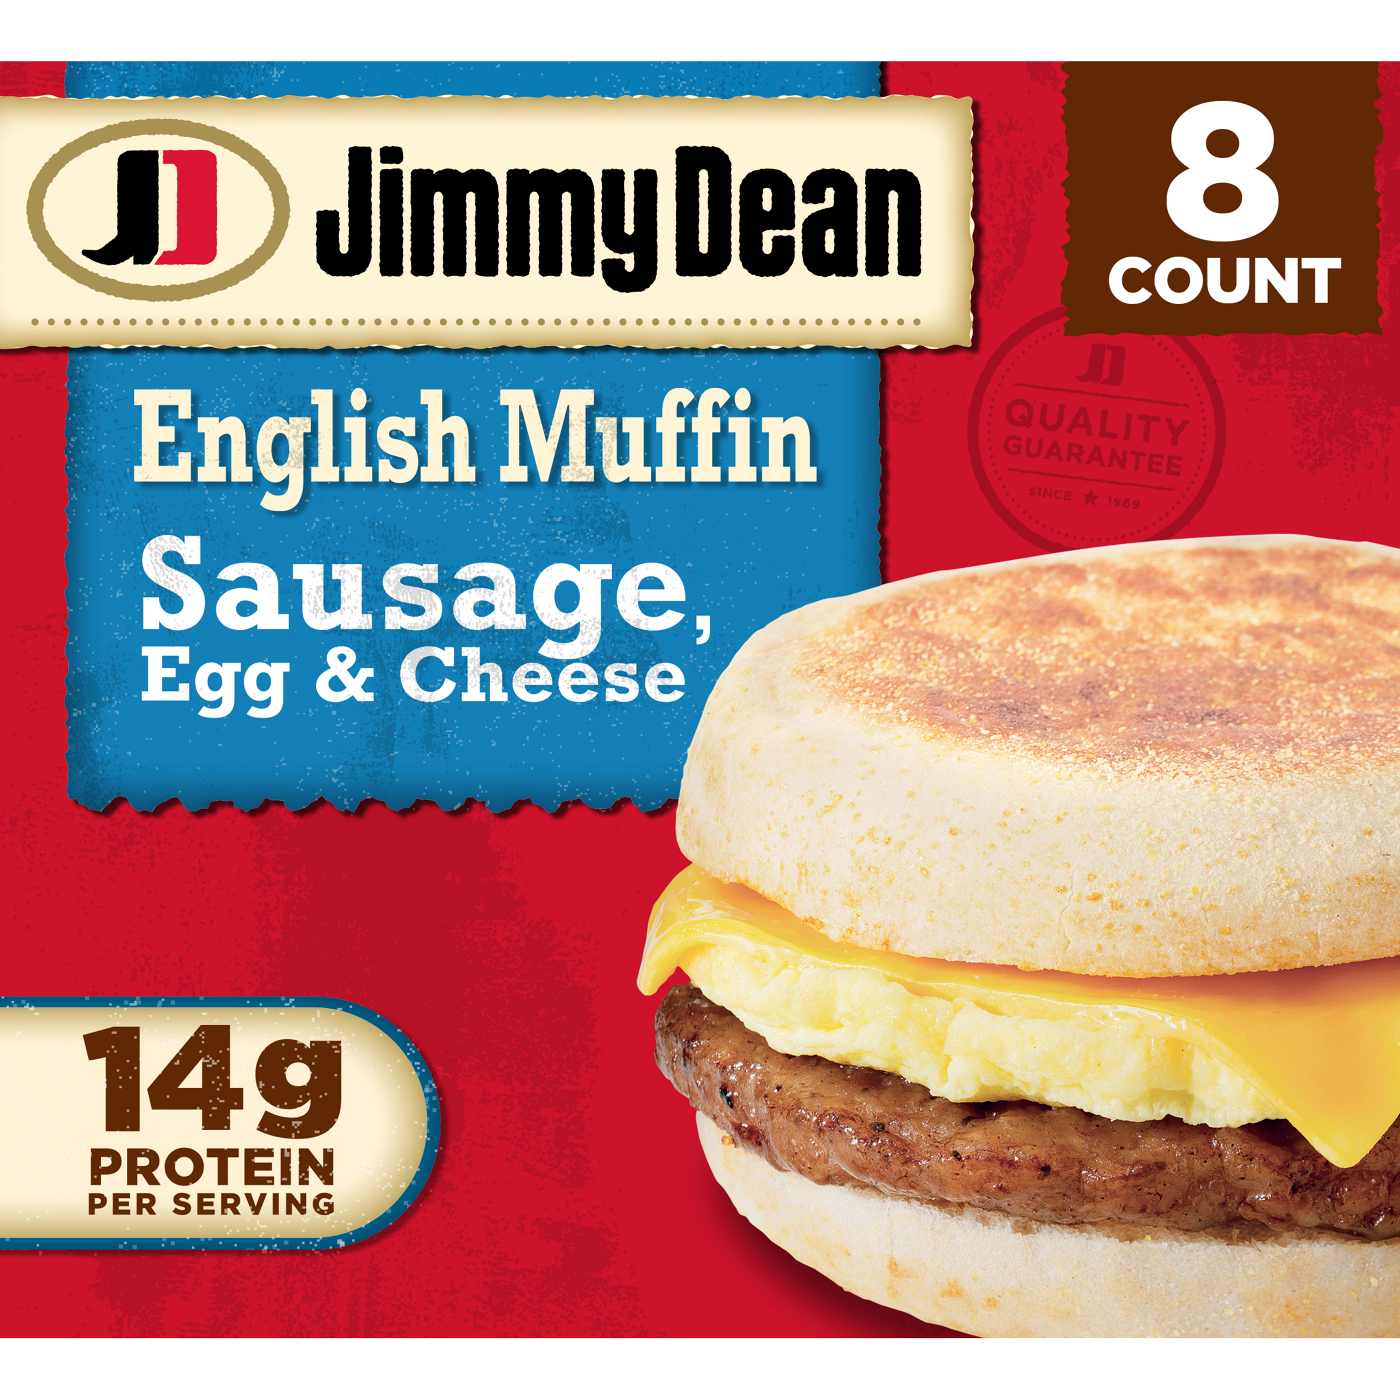 Jimmy Dean Sausage, Egg & Cheese English Muffin Sandwiches; image 1 of 5